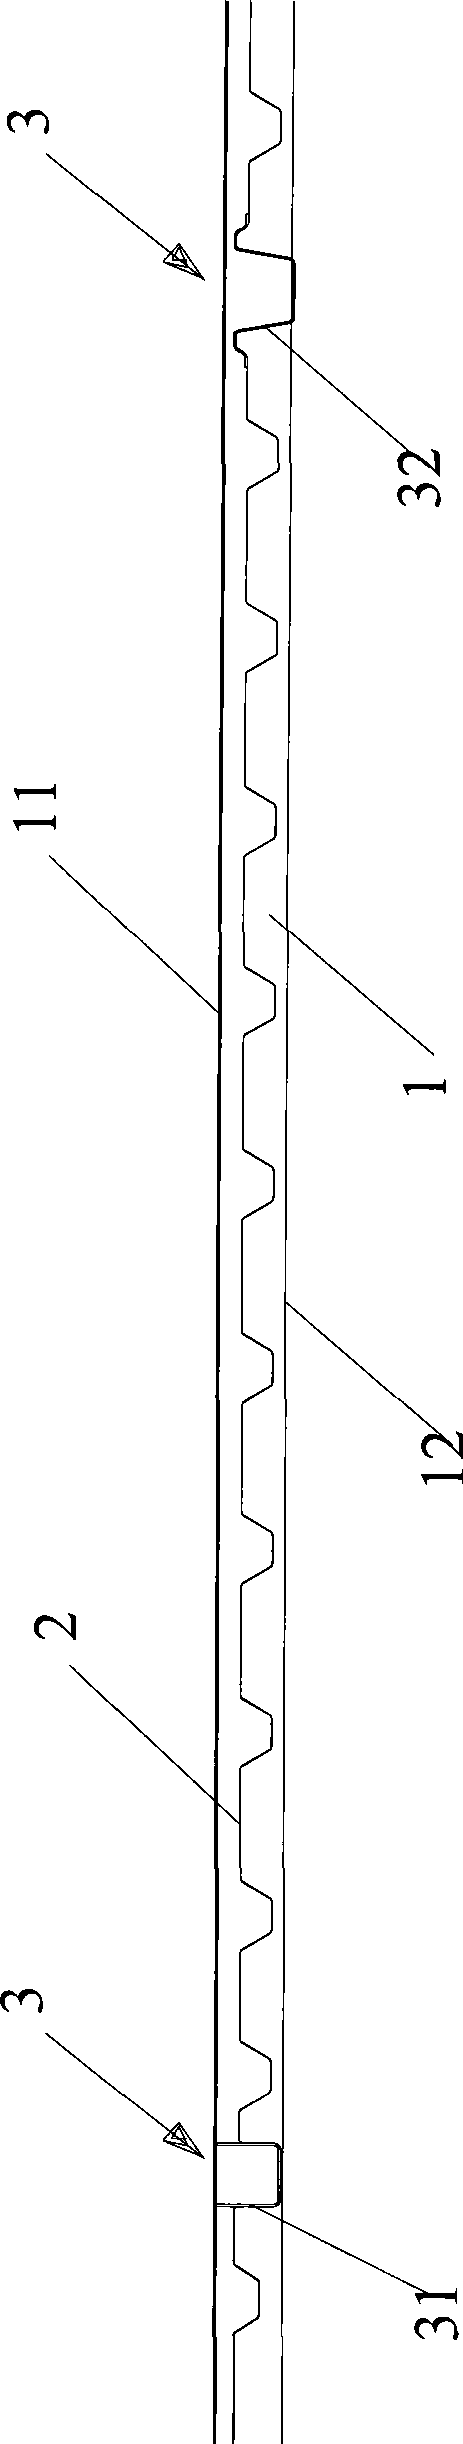 Underframe structure of refrigerated container